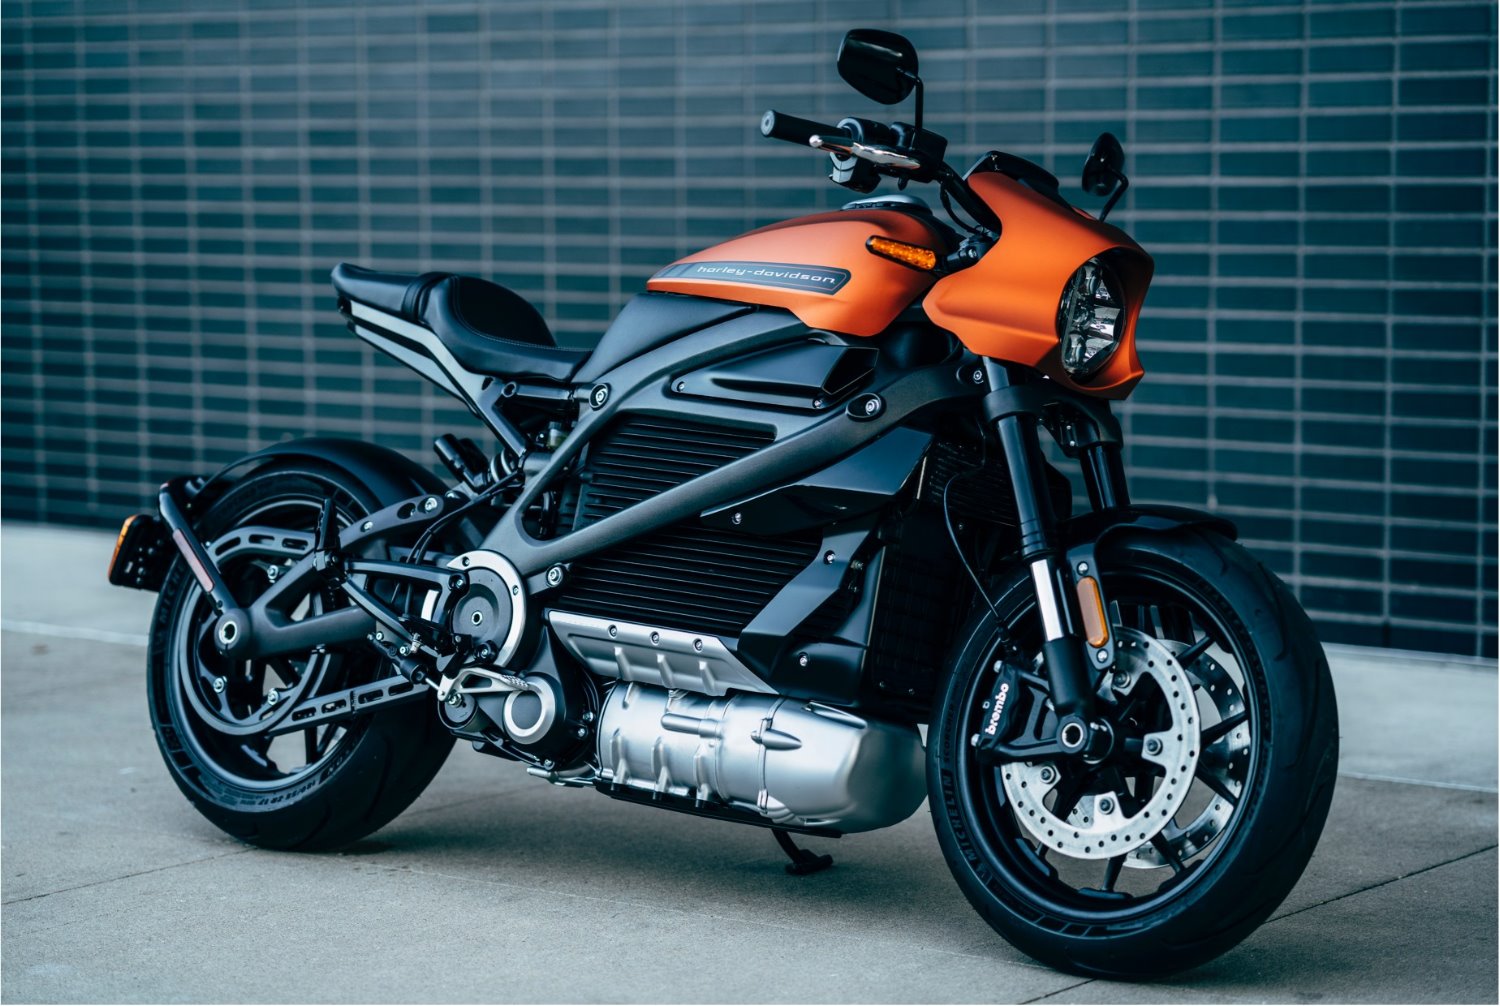 Harley Davidson's first electric motorcycle